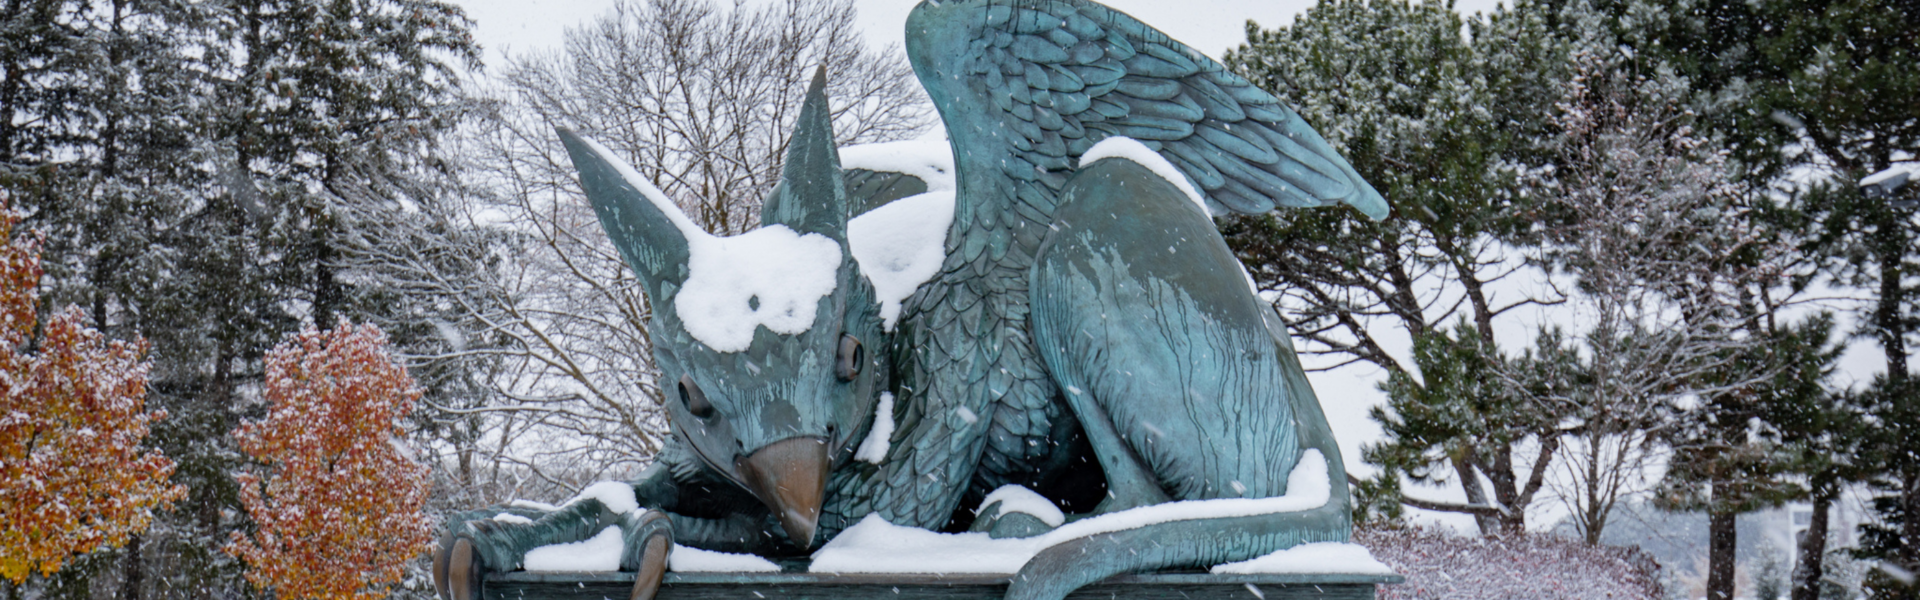 The U of G Gryphon statue covered in a dusting of snow.